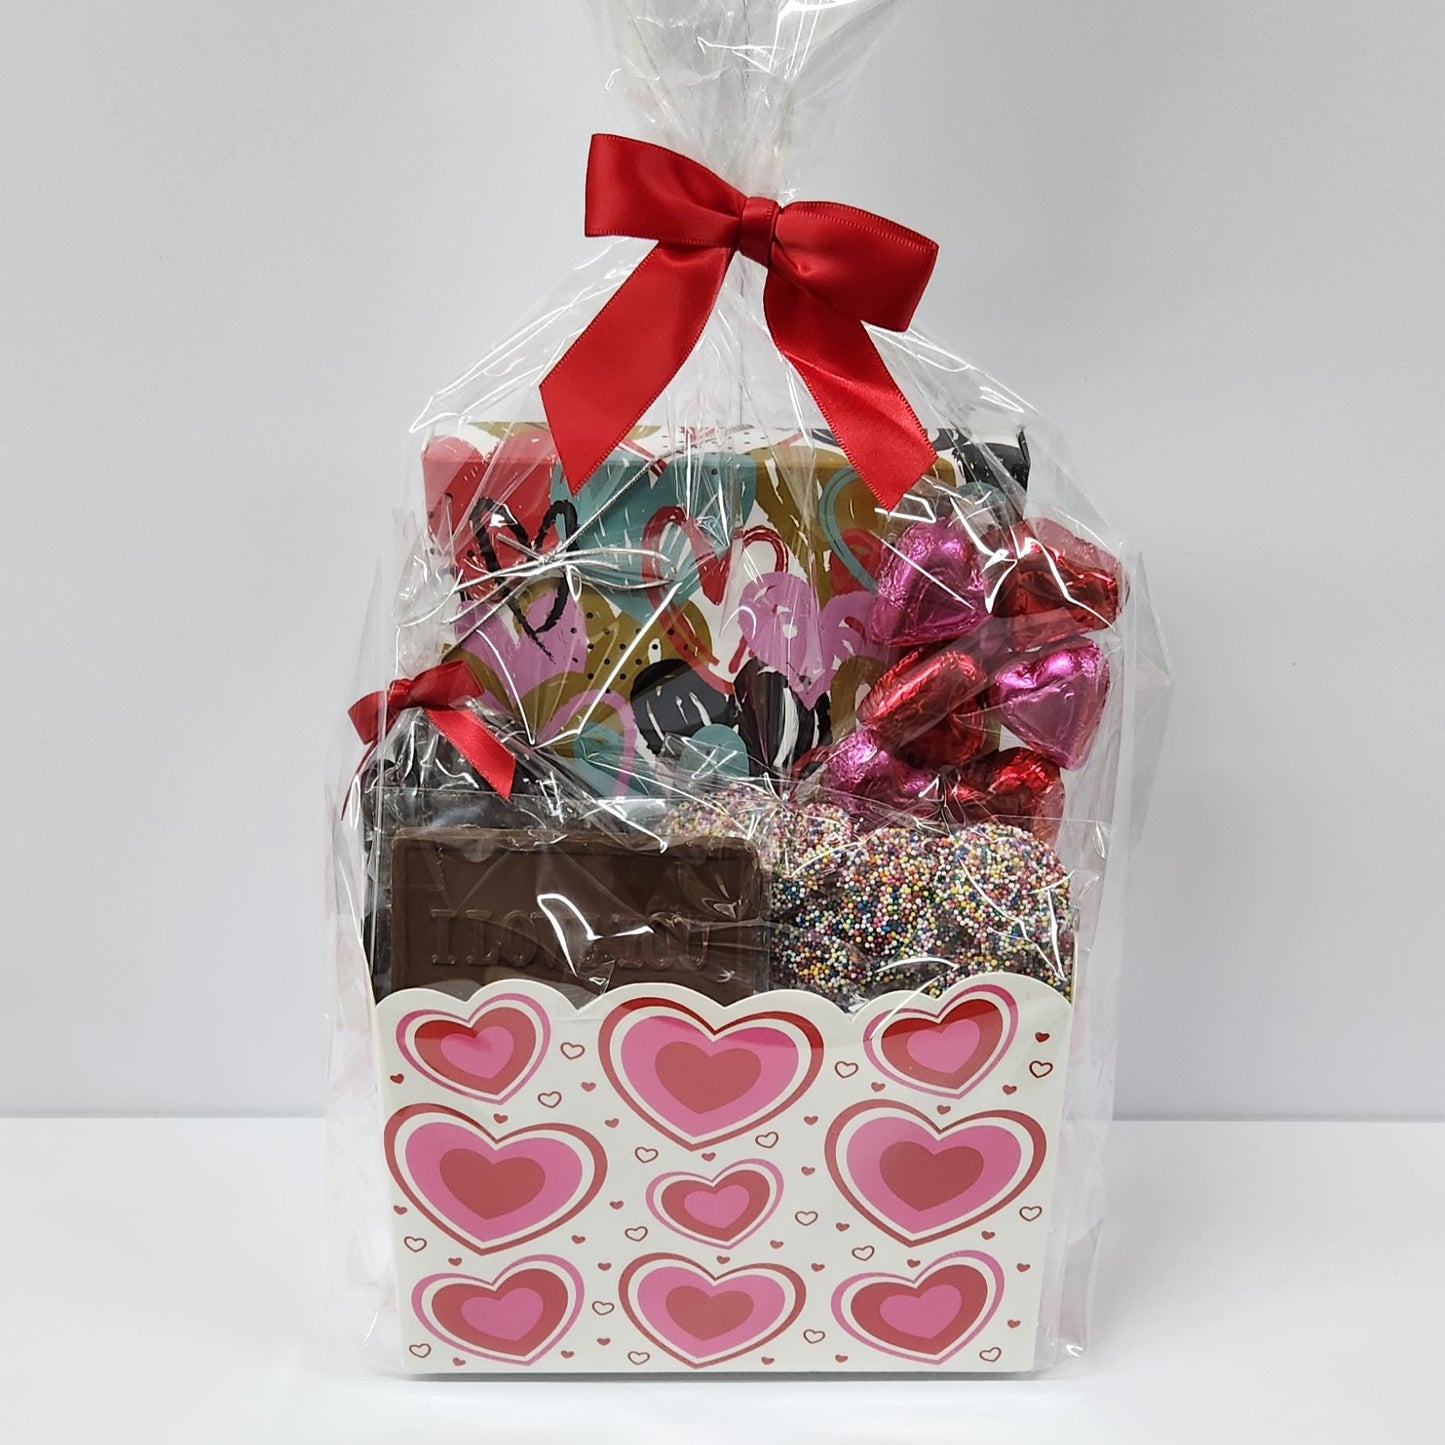 I Love You Gift Basket from Stage Stop Candy wrapped in plastic and tied with a red bow